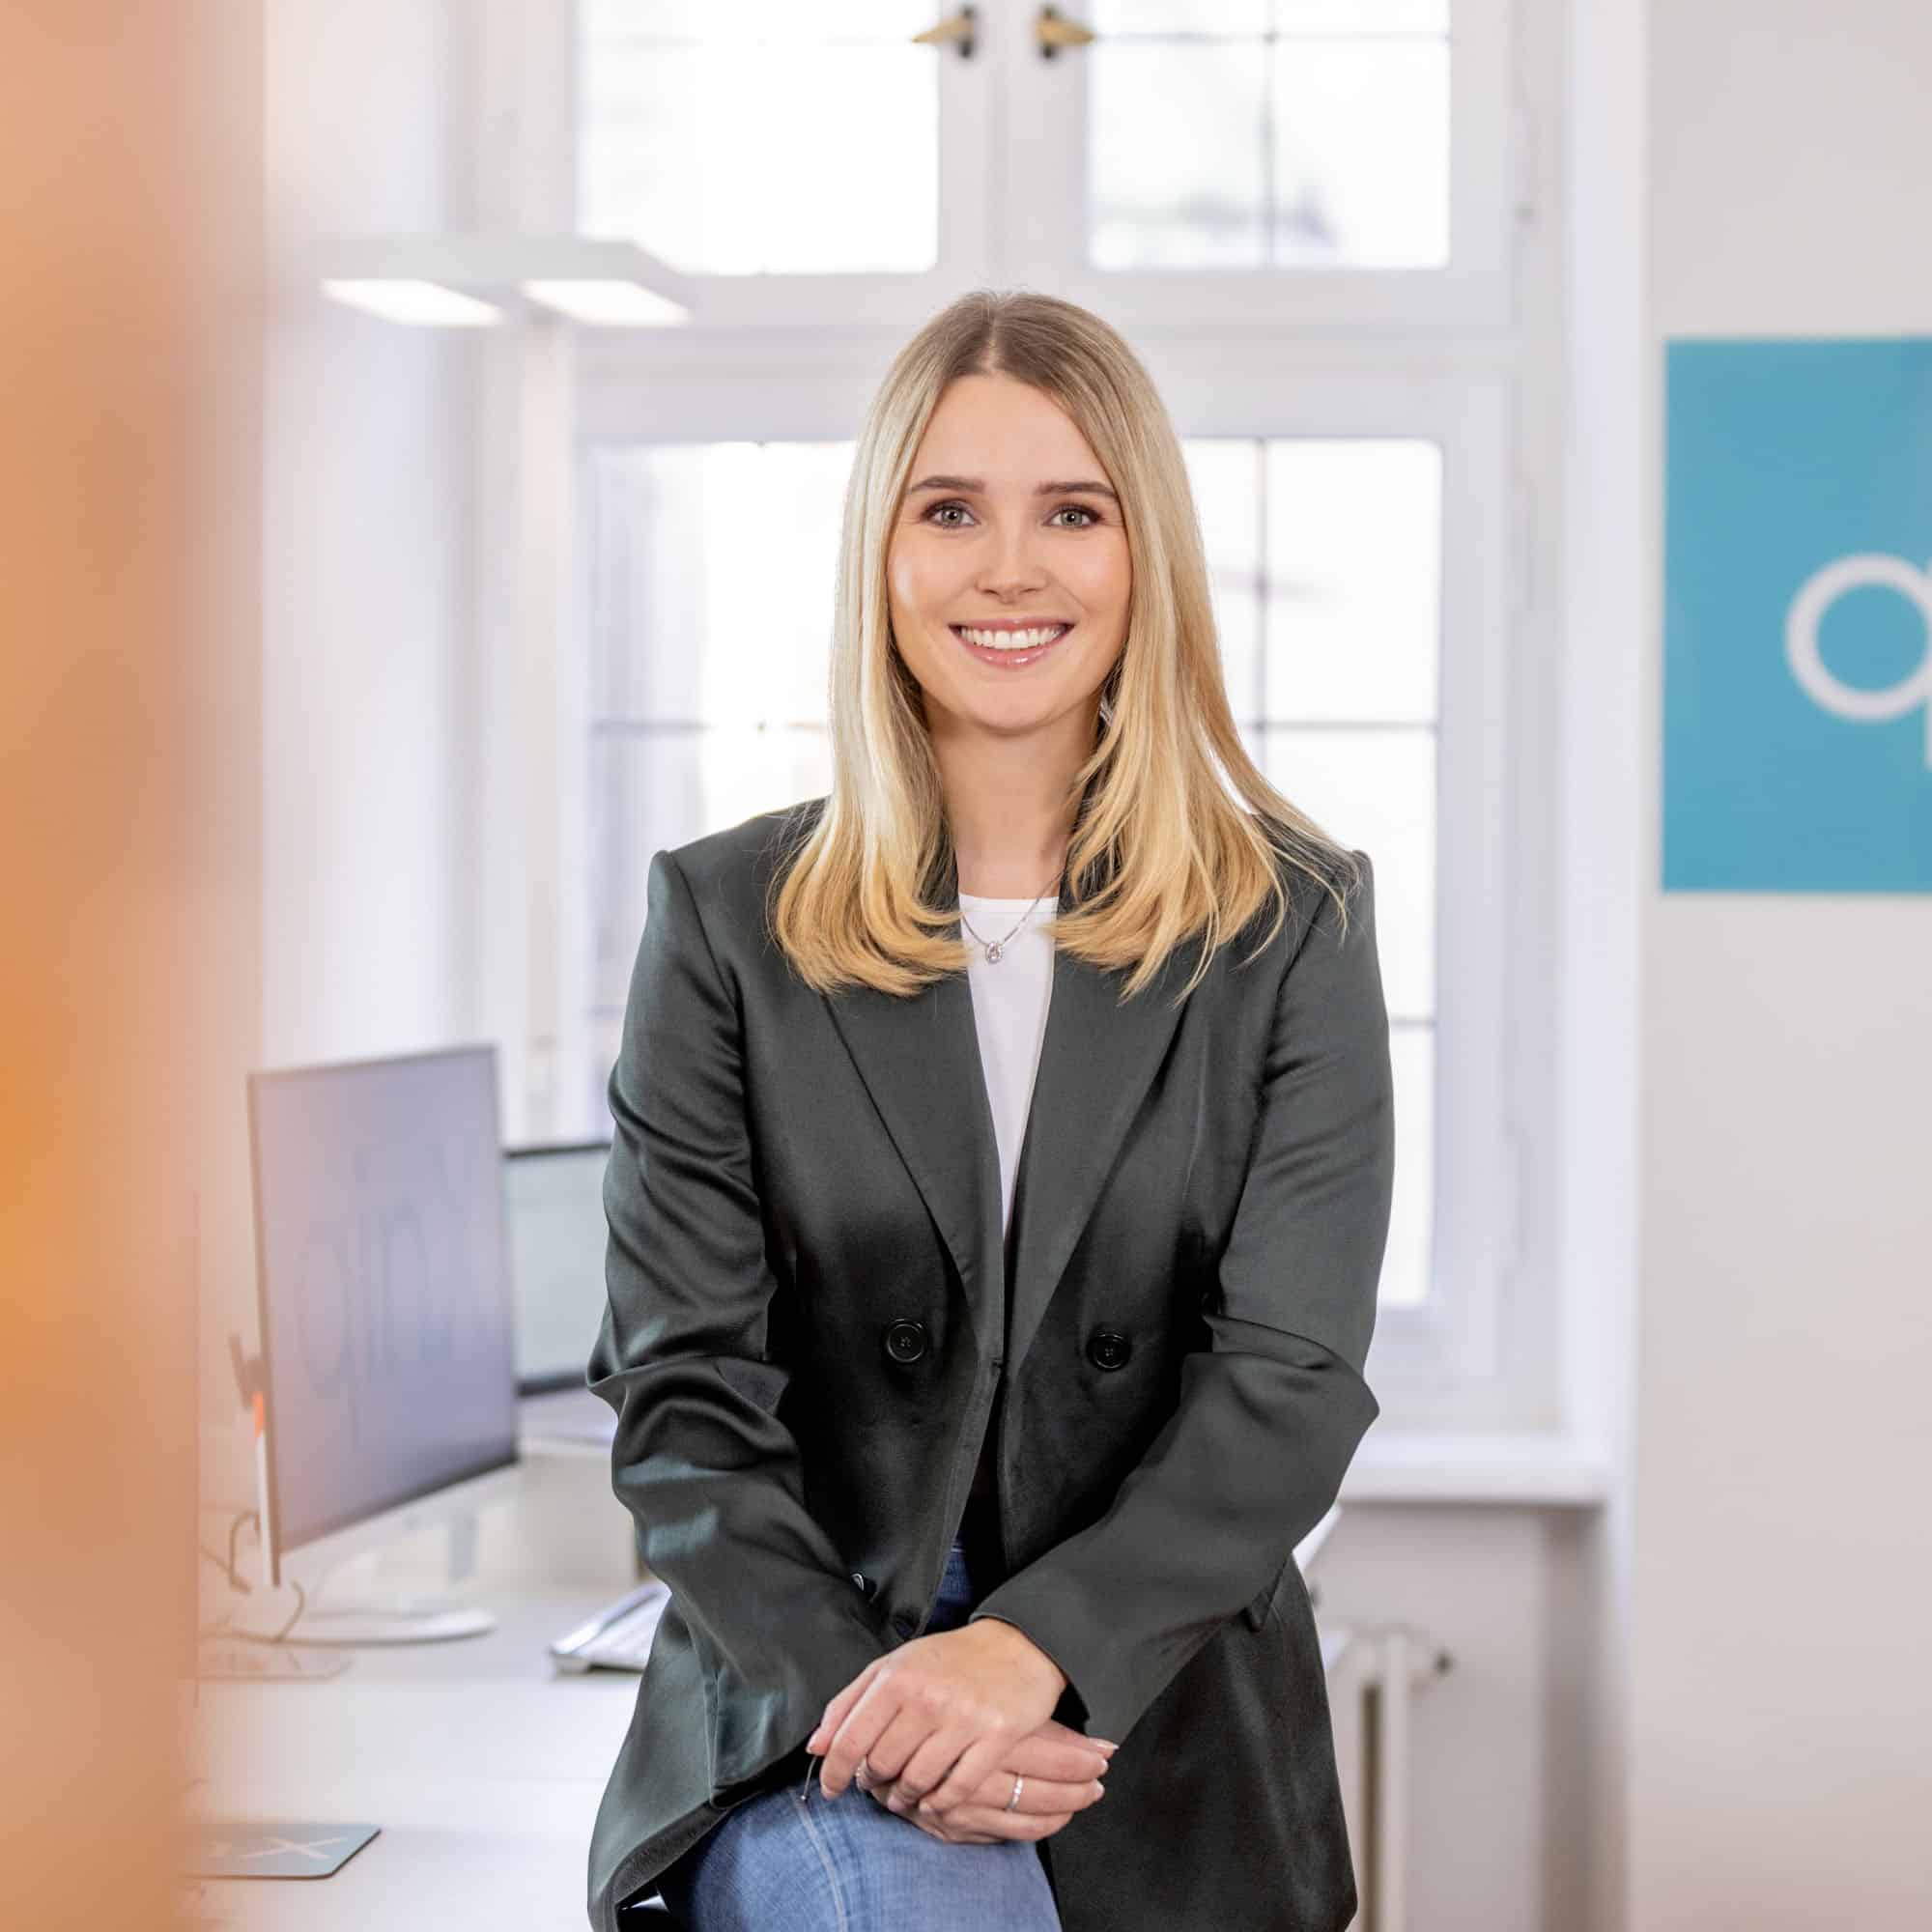 qinx - Talent placement - Recruitment agency - About us - Founder Laura Fricker